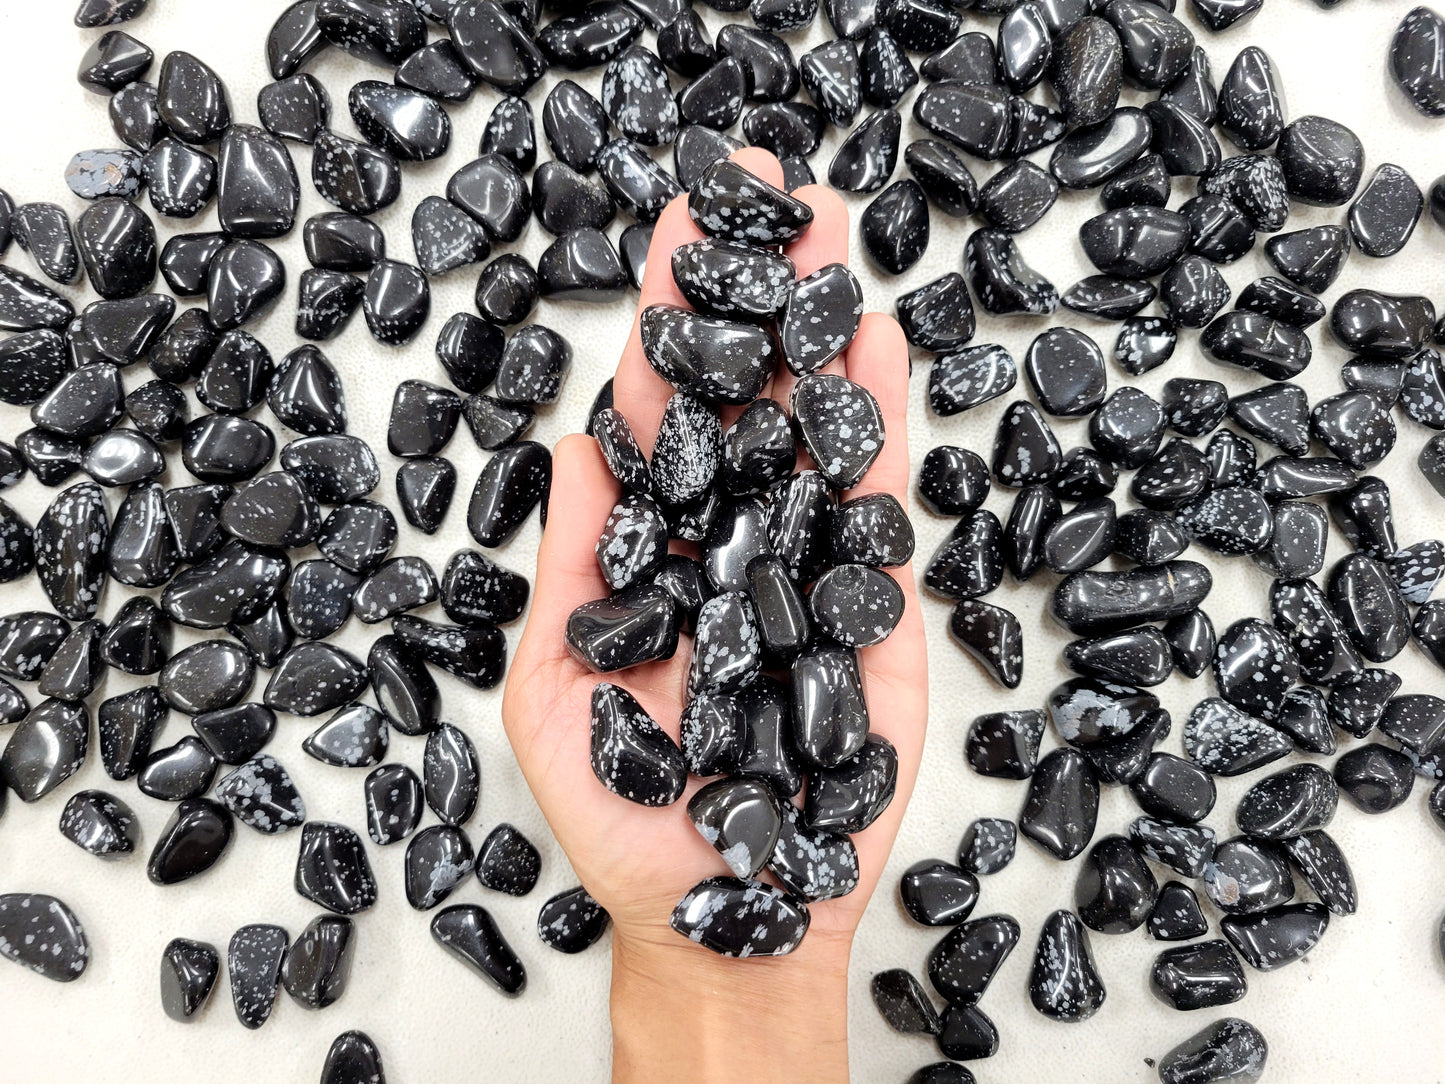 Tumbled Snowflake Obsidian Crystal Stones Bulk - Size Small 1/2 inch to 1 inch